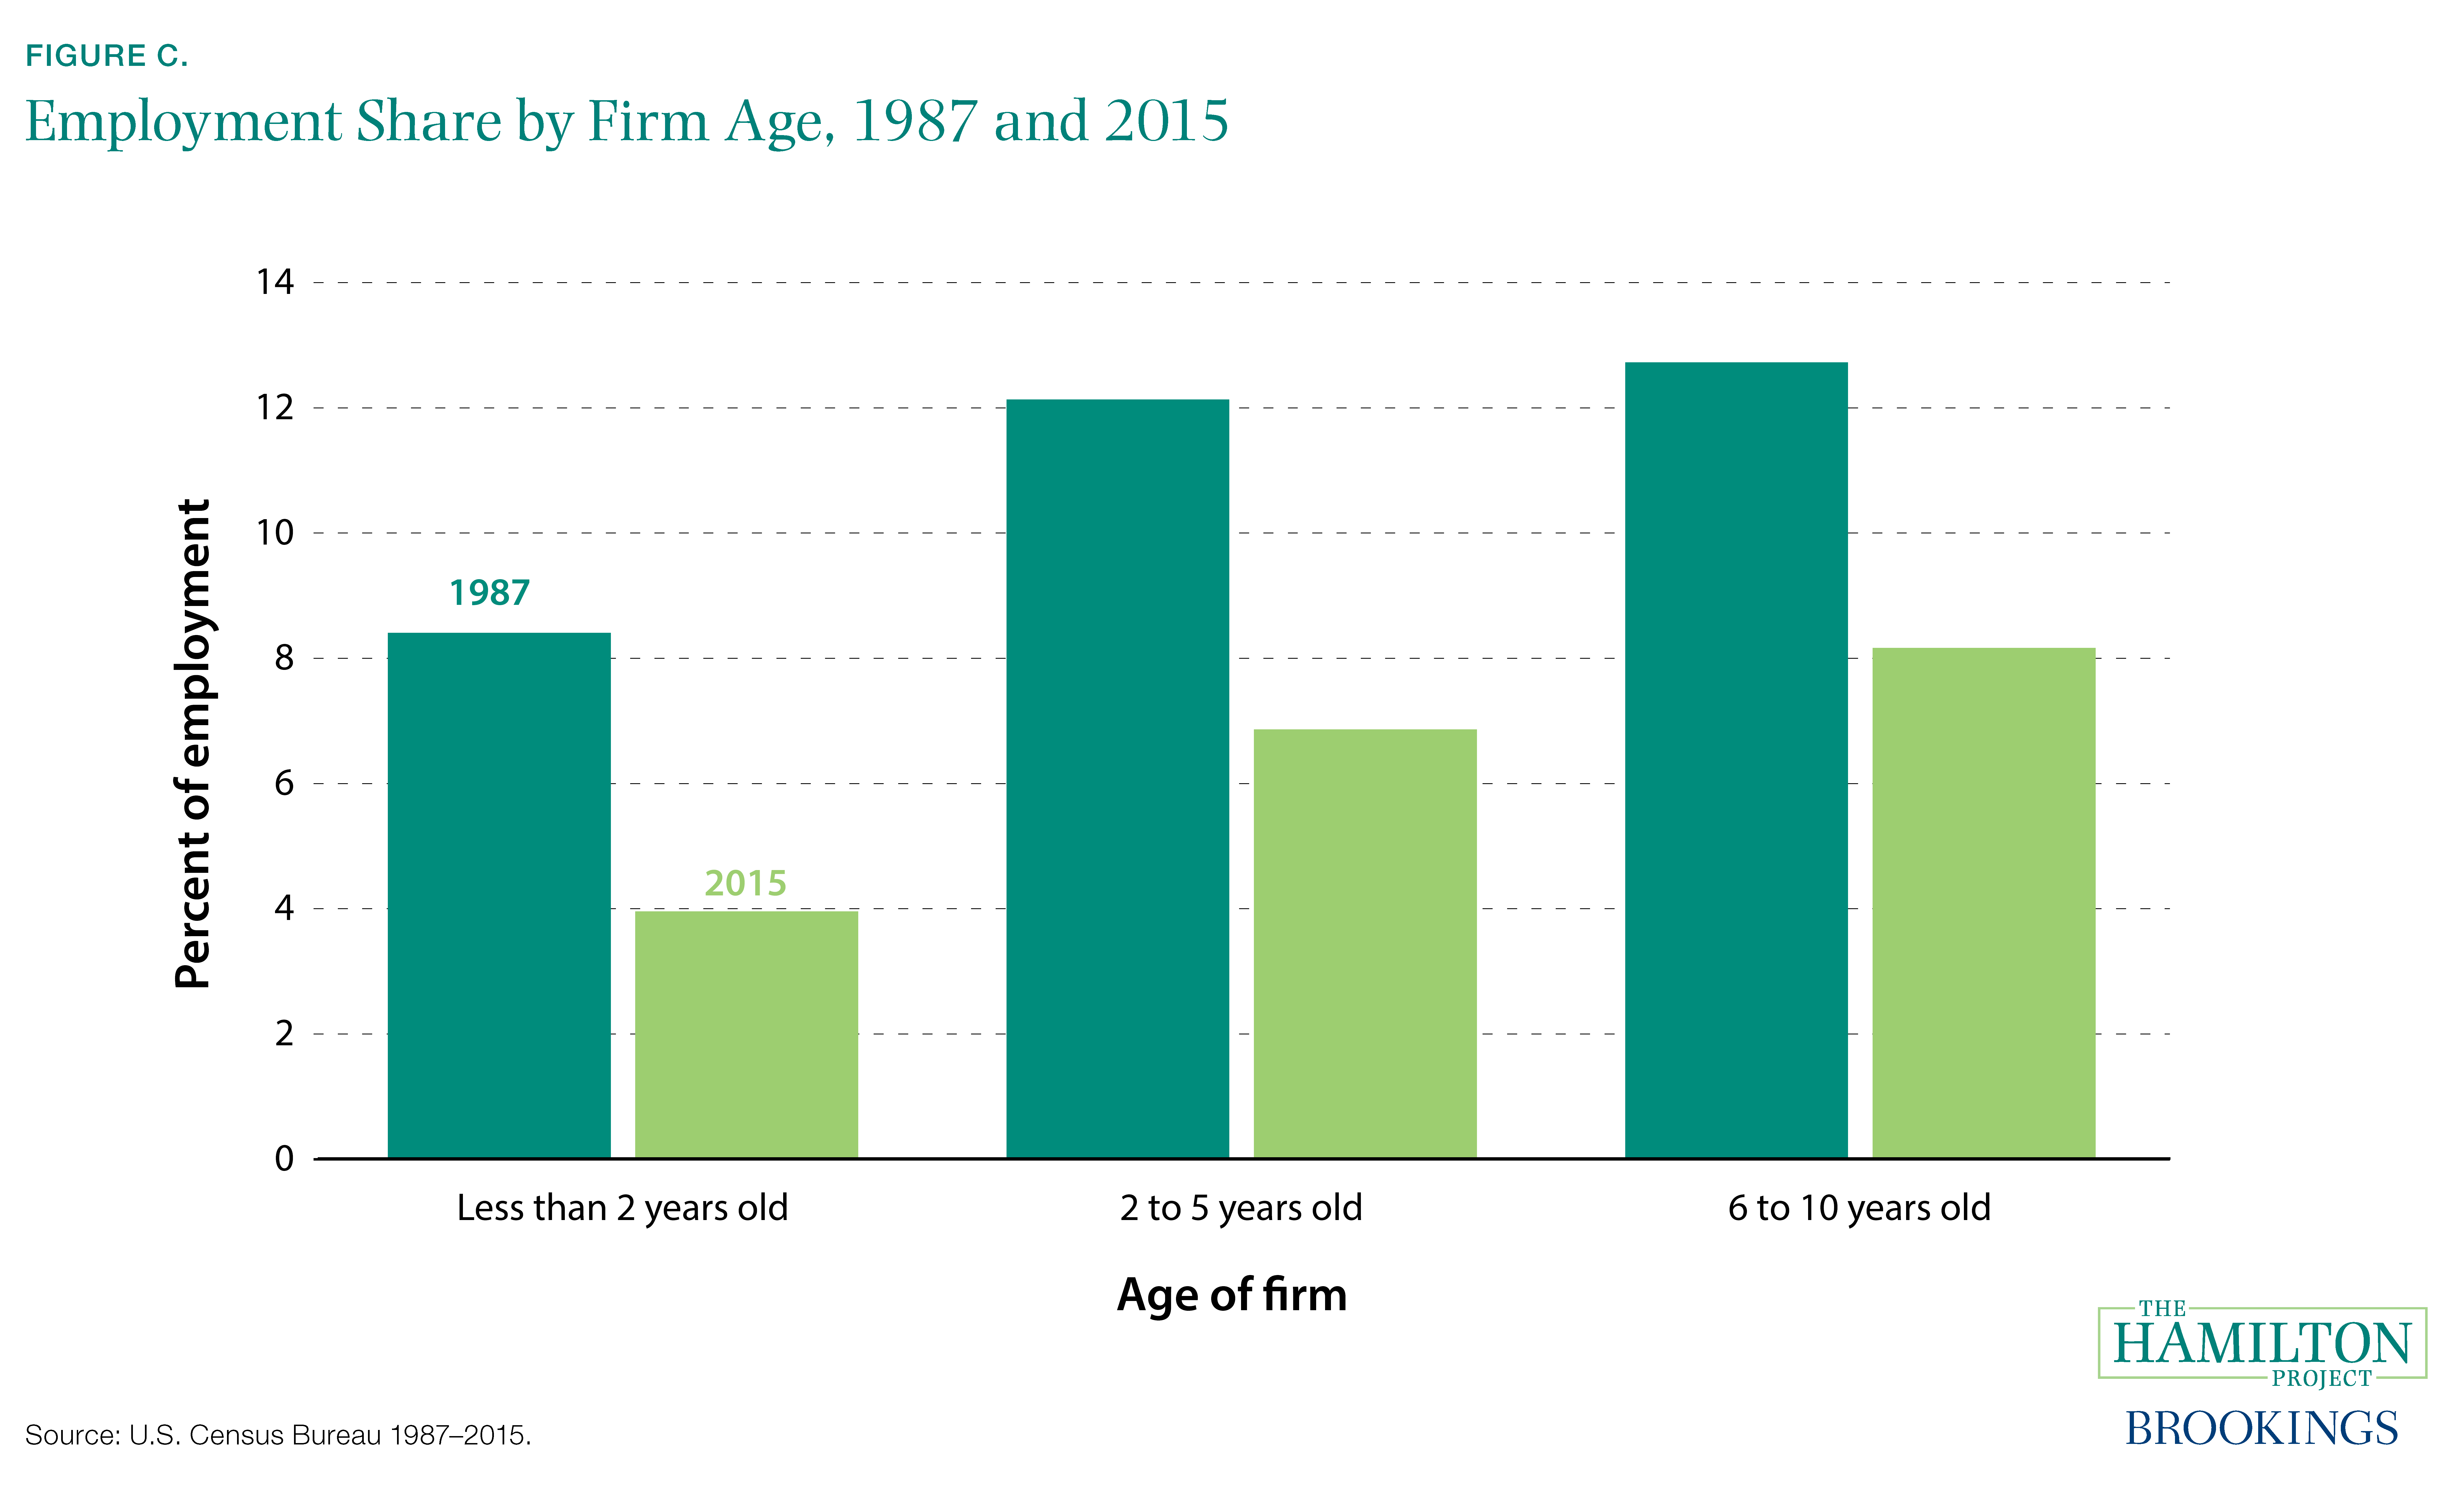 Figure C. Employment Share by Firm Age, 1987 and 2015